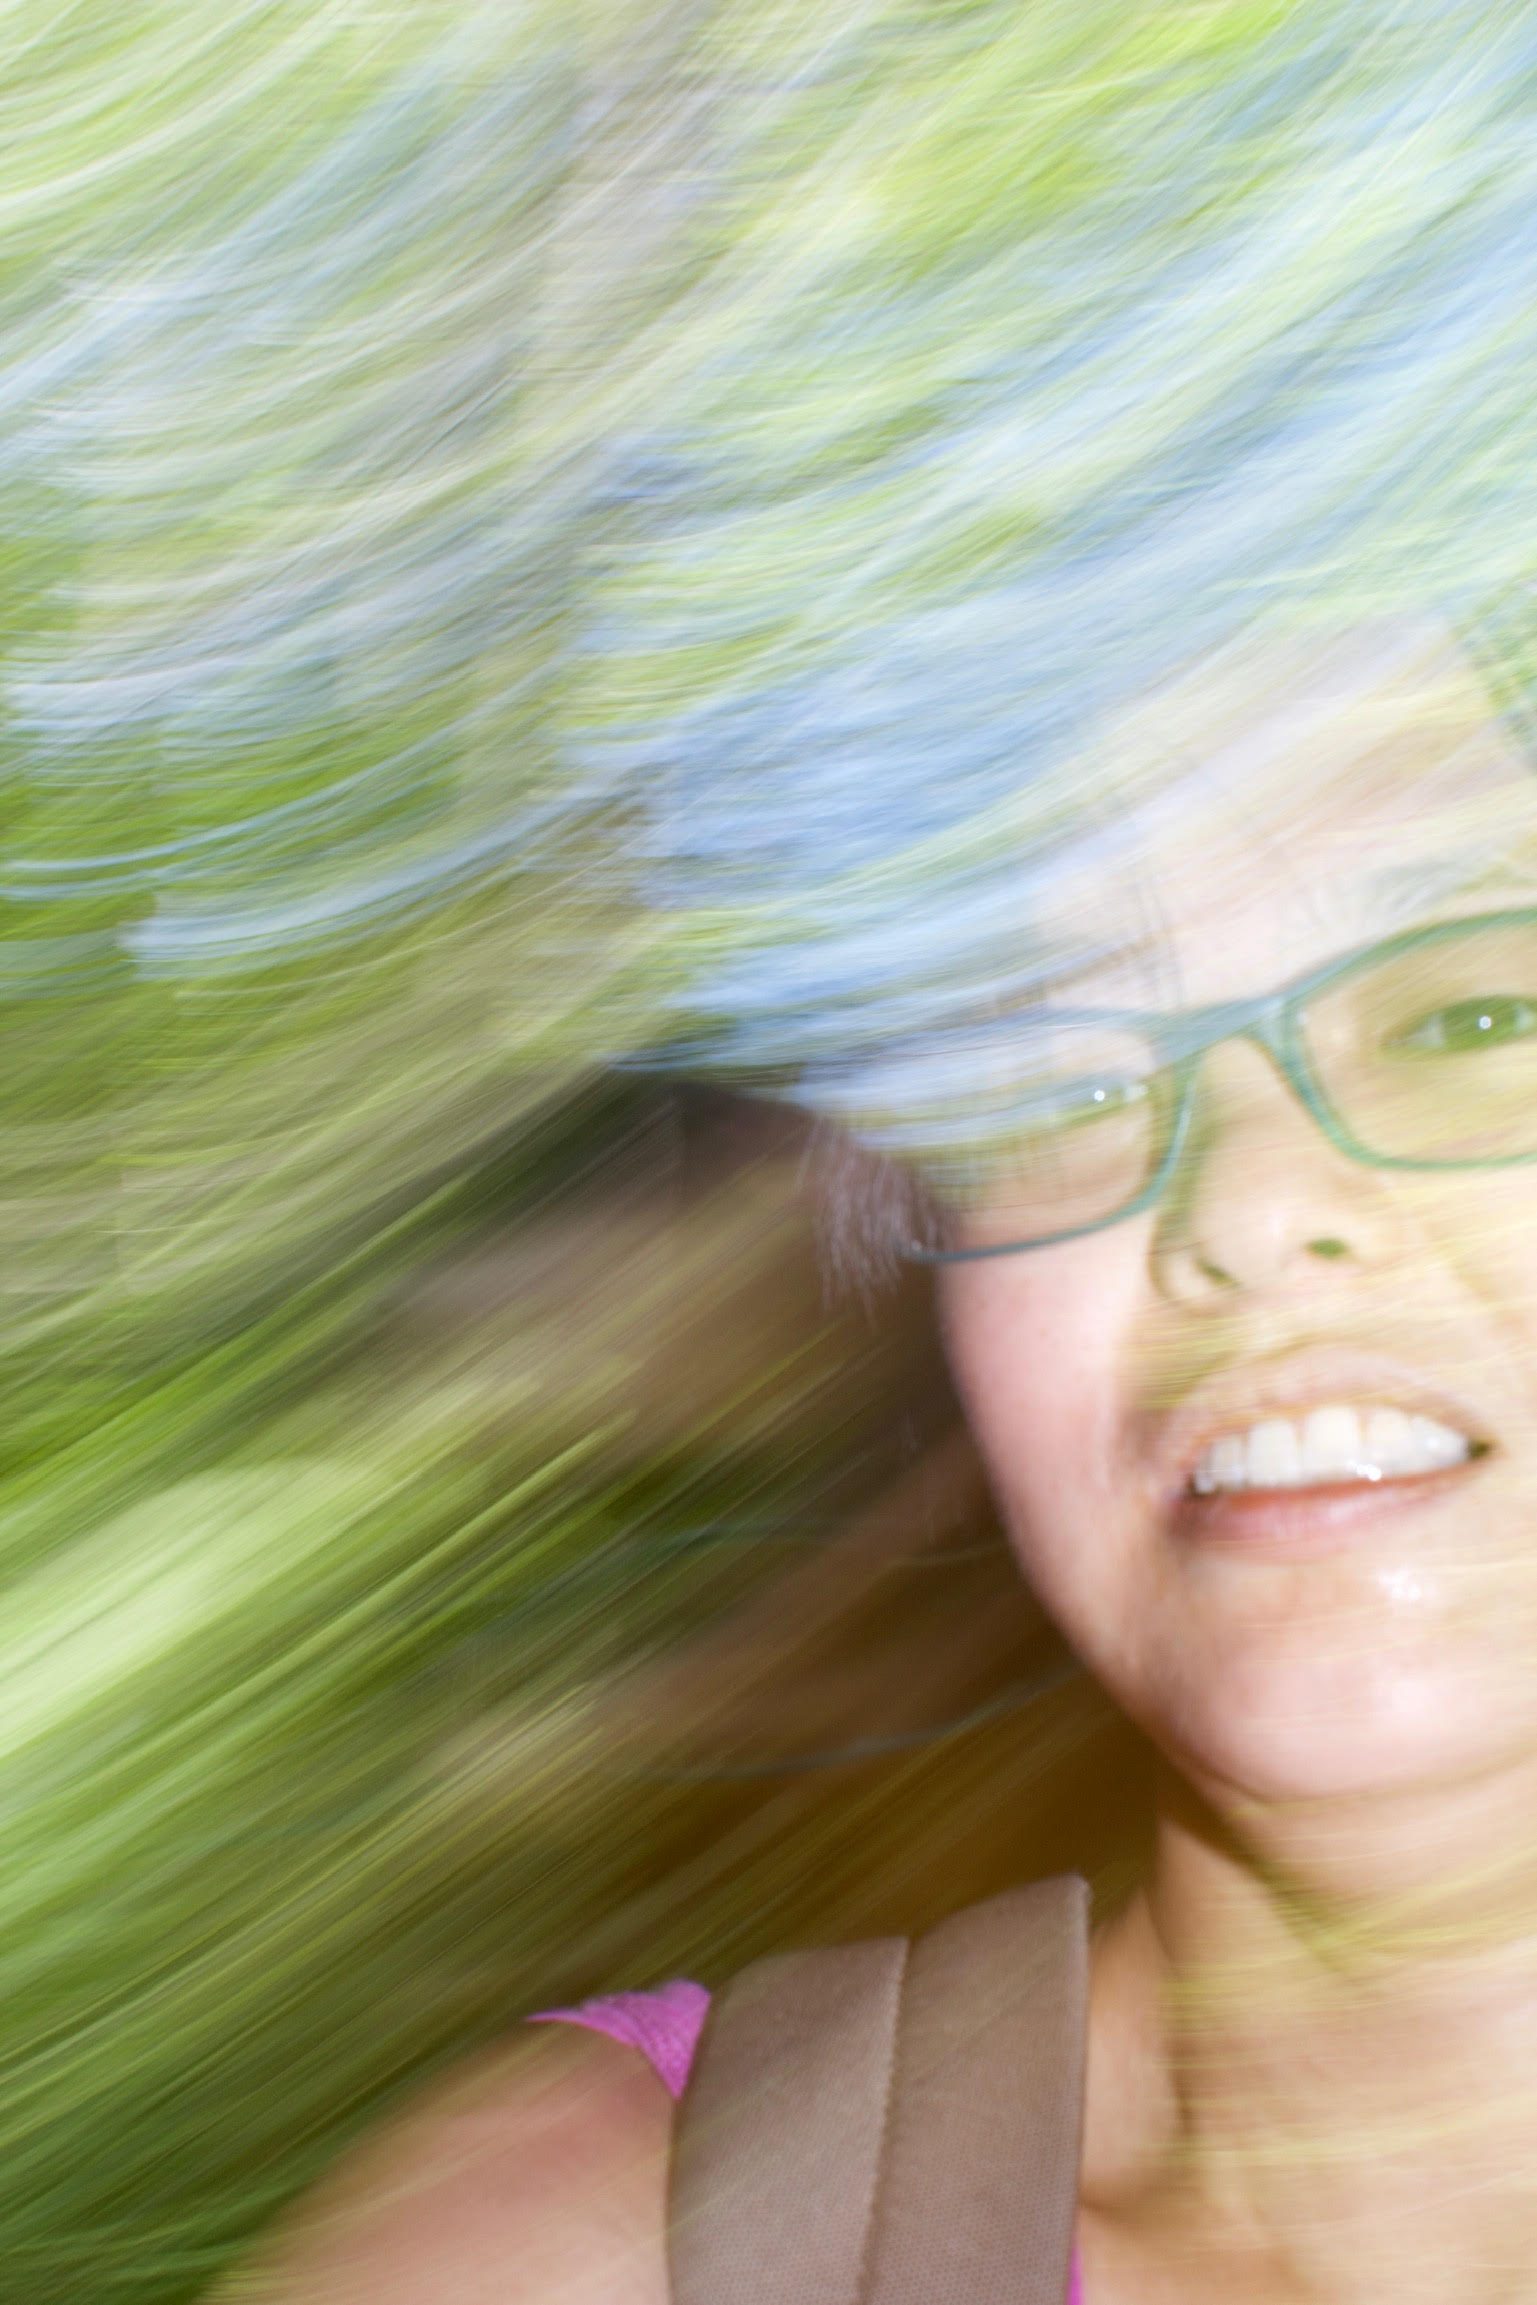 A blurred selfie-style image of Tina Zhu Xi Caruso, a young Asian woman wearing glasses and smiling for the camera